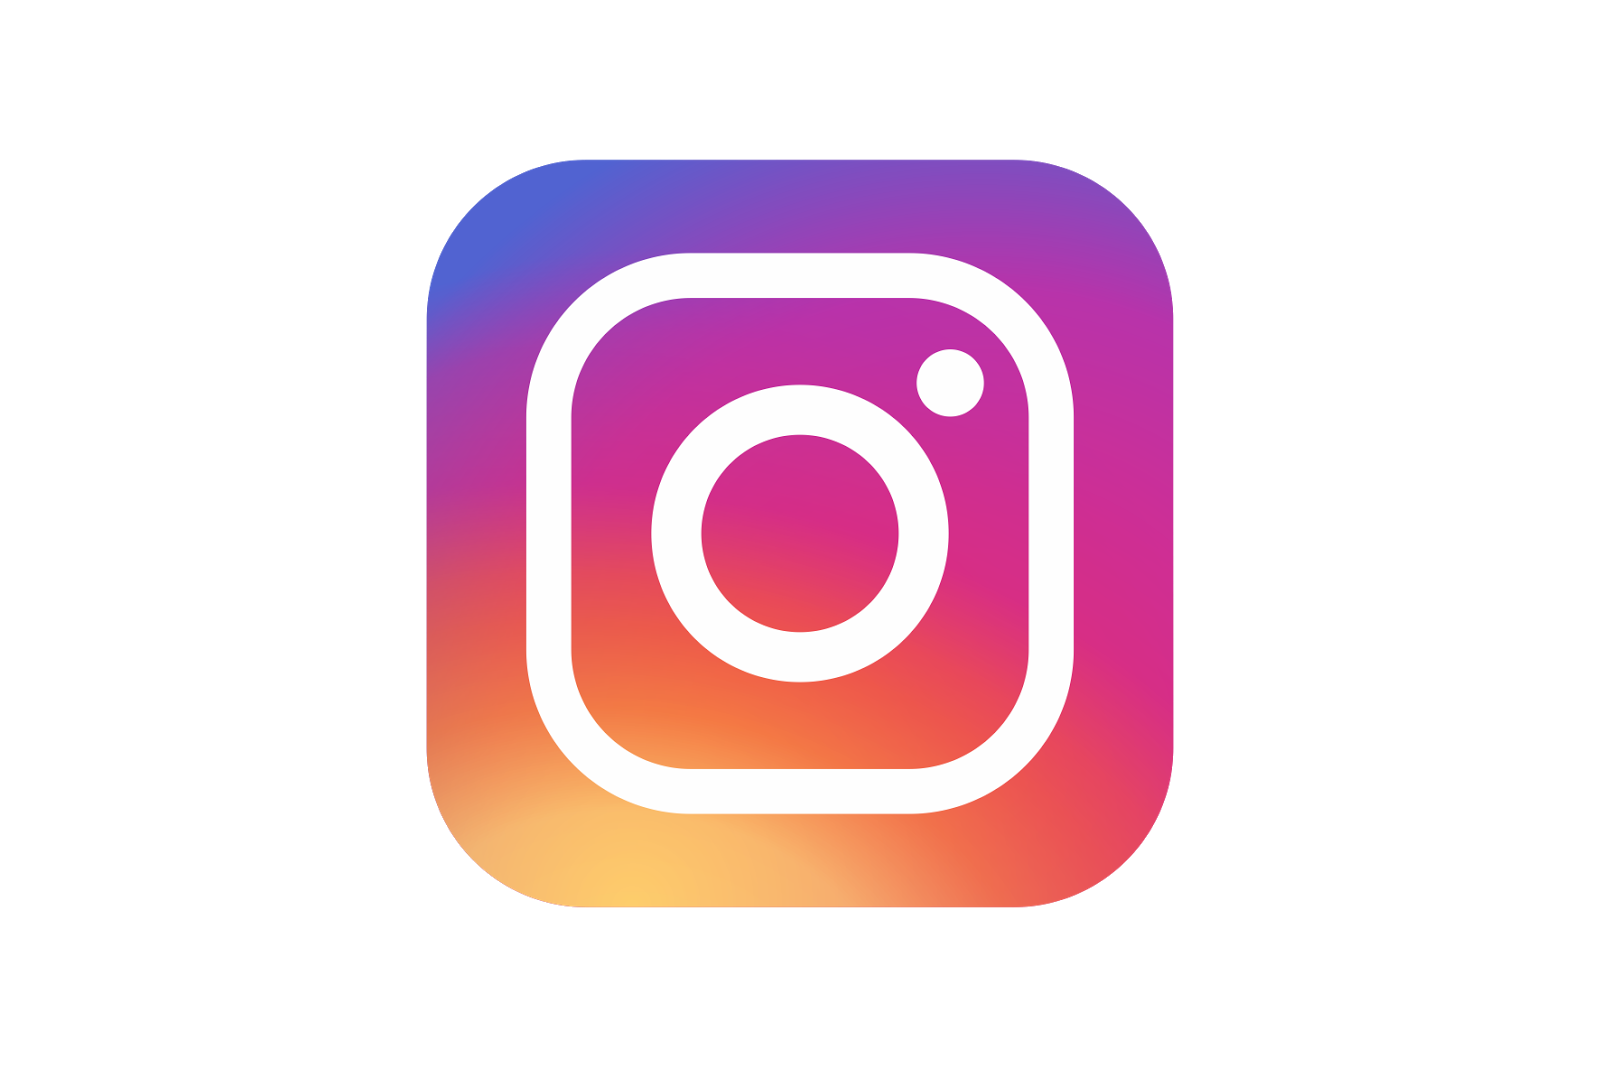 Logo Computer Camera Instagram Icons HQ Image Free PNG PNG Image